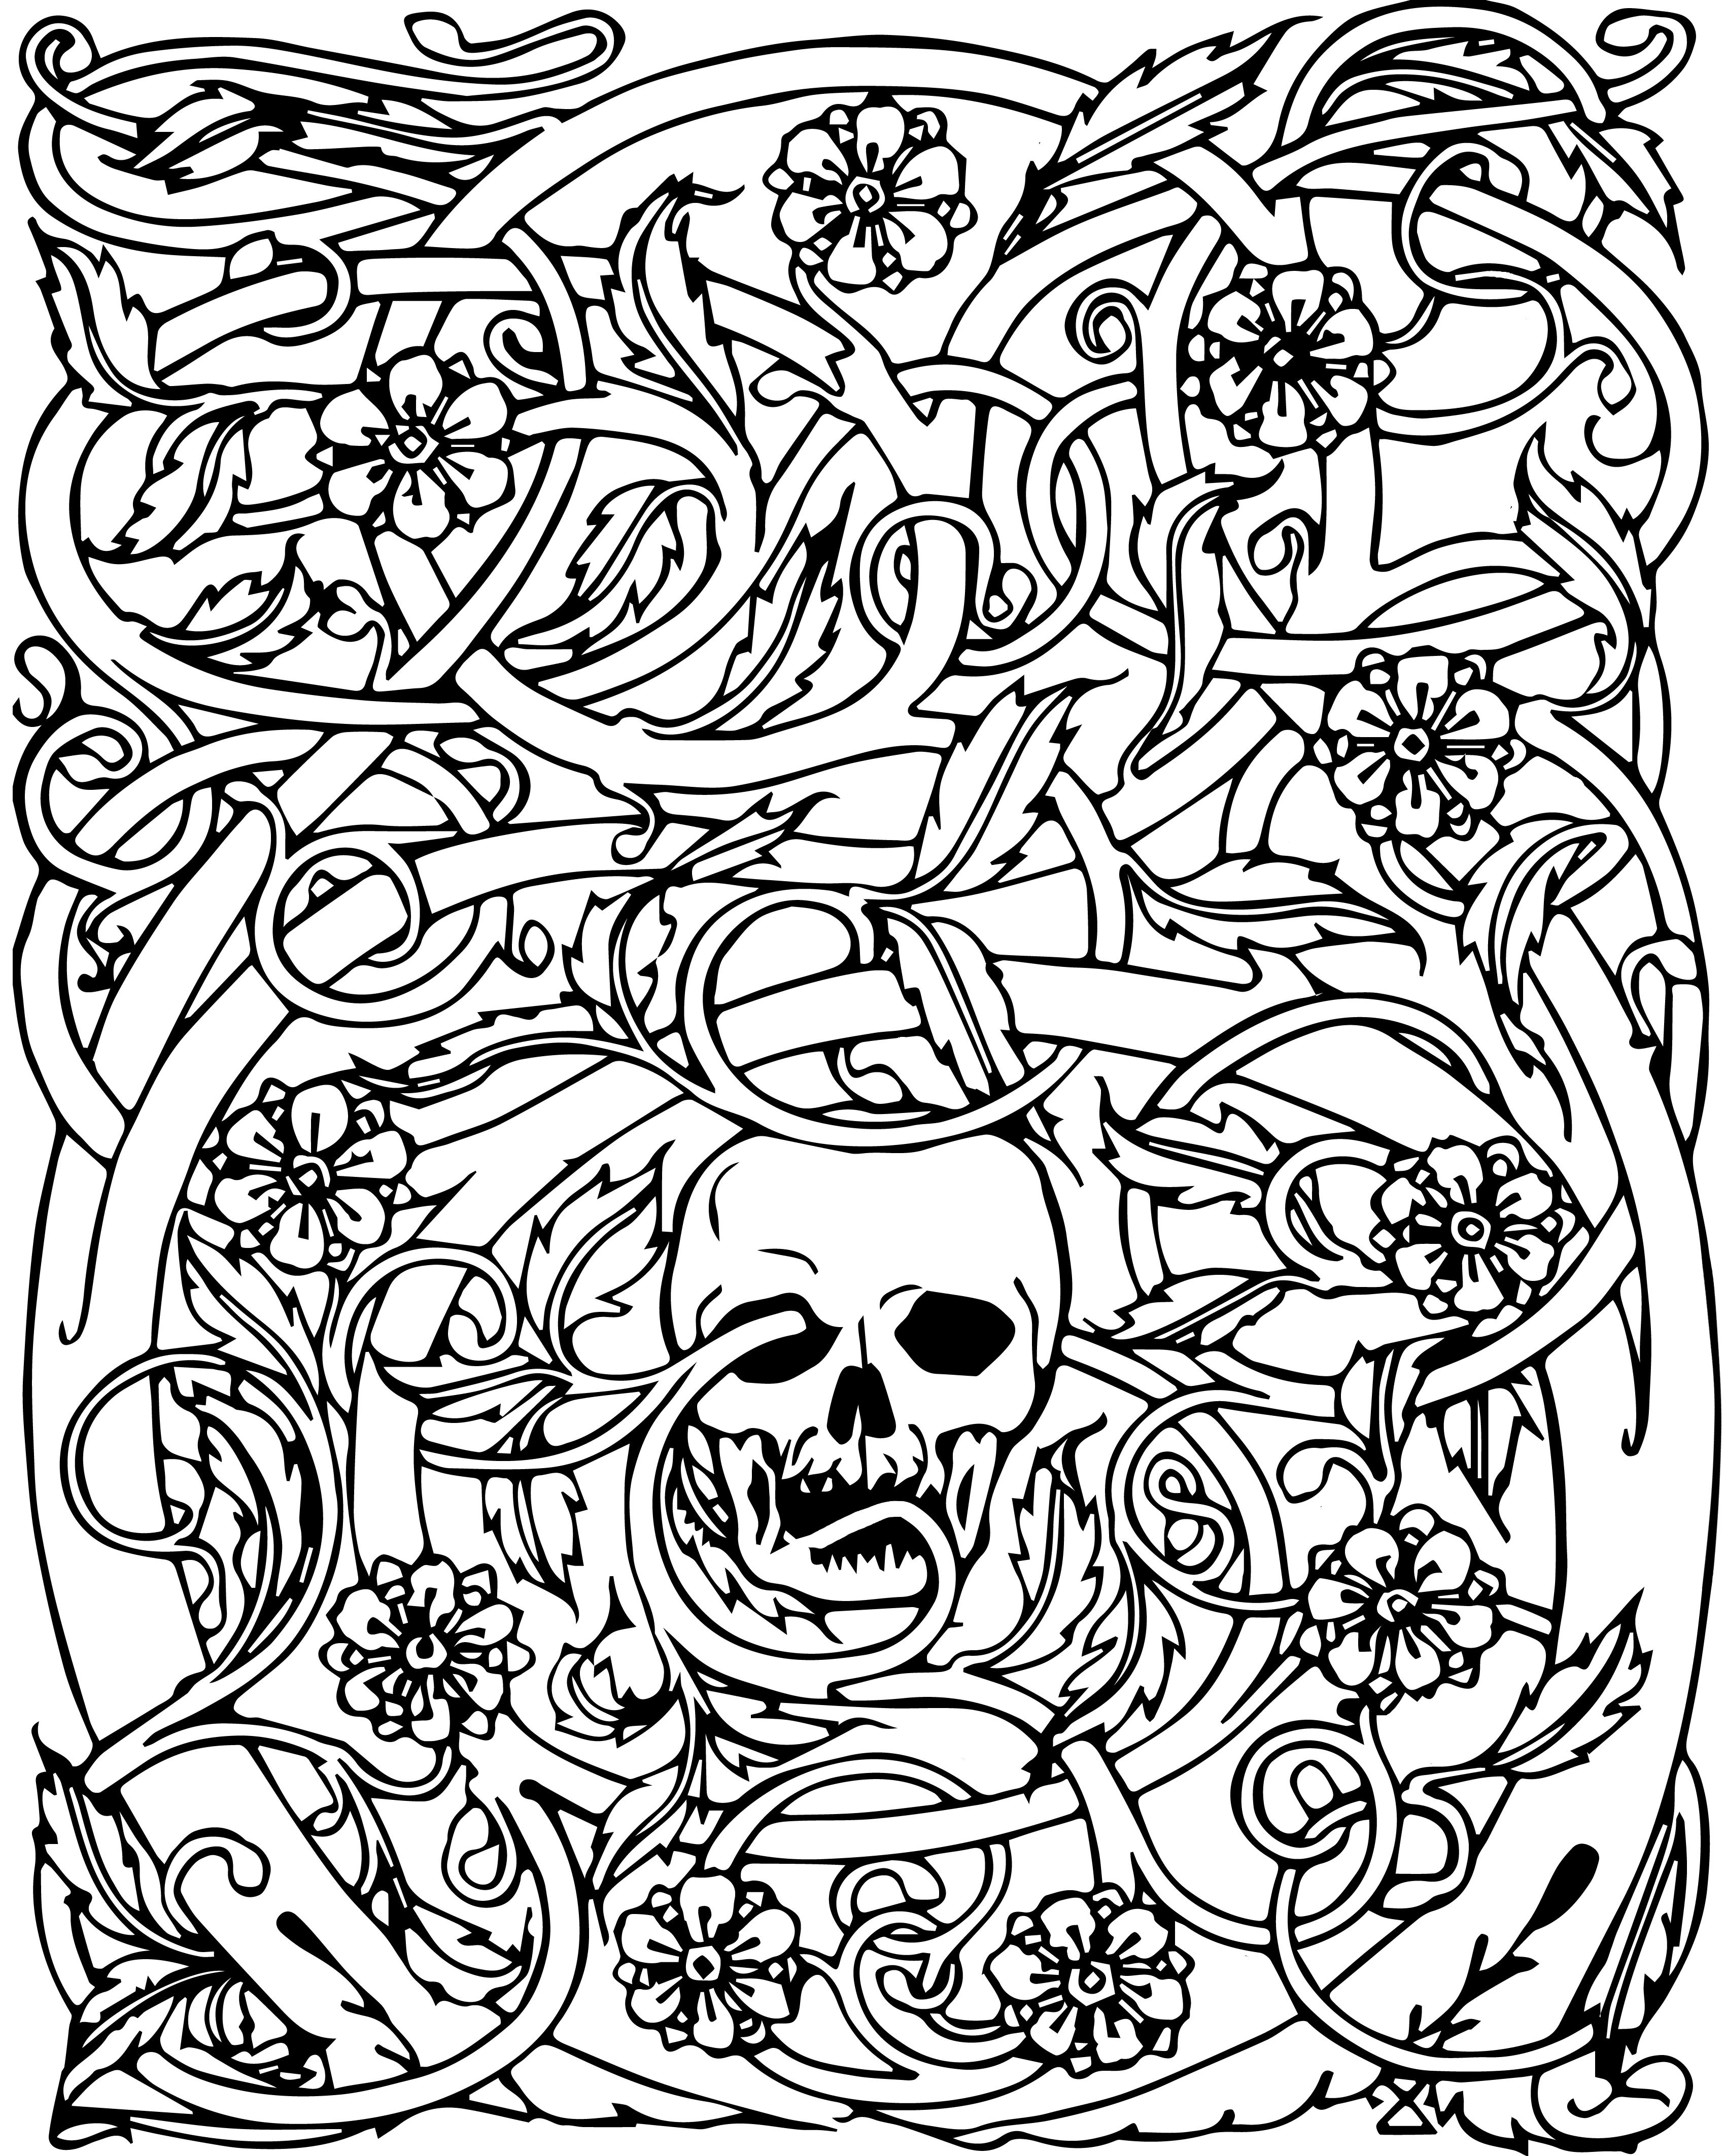 Abstract For Adults Coloring Pages - Coloring Home